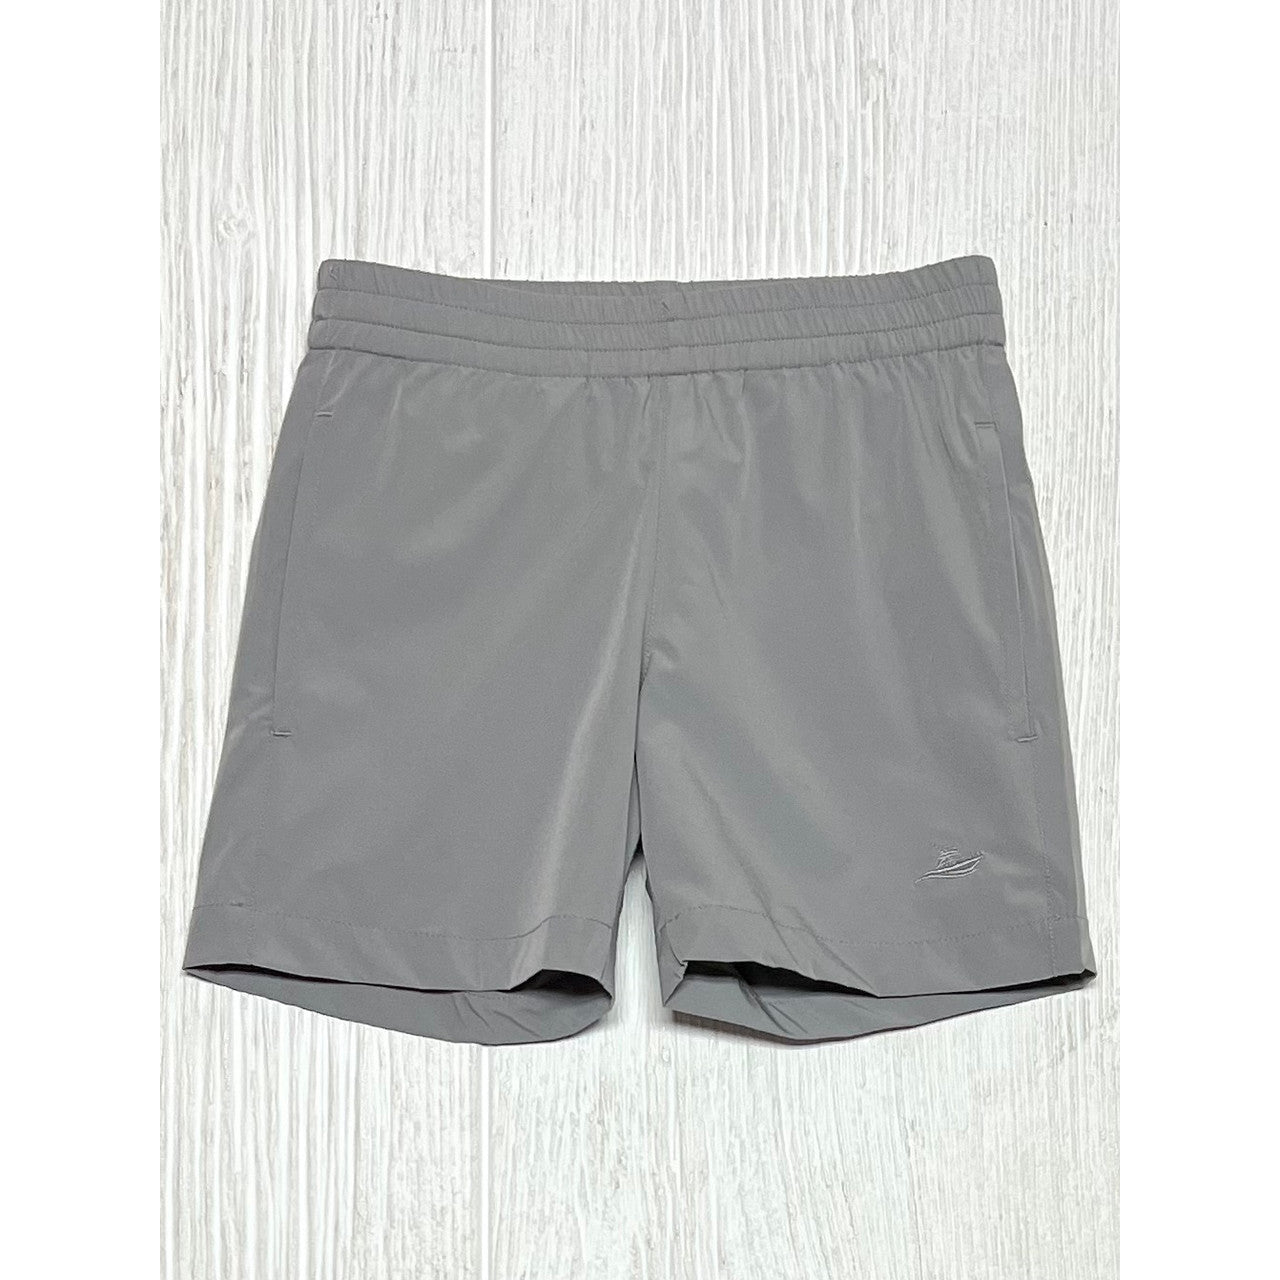 Southbound Performance Play Shorts - Silver-SOUTHBOUND-Little Giant Kidz